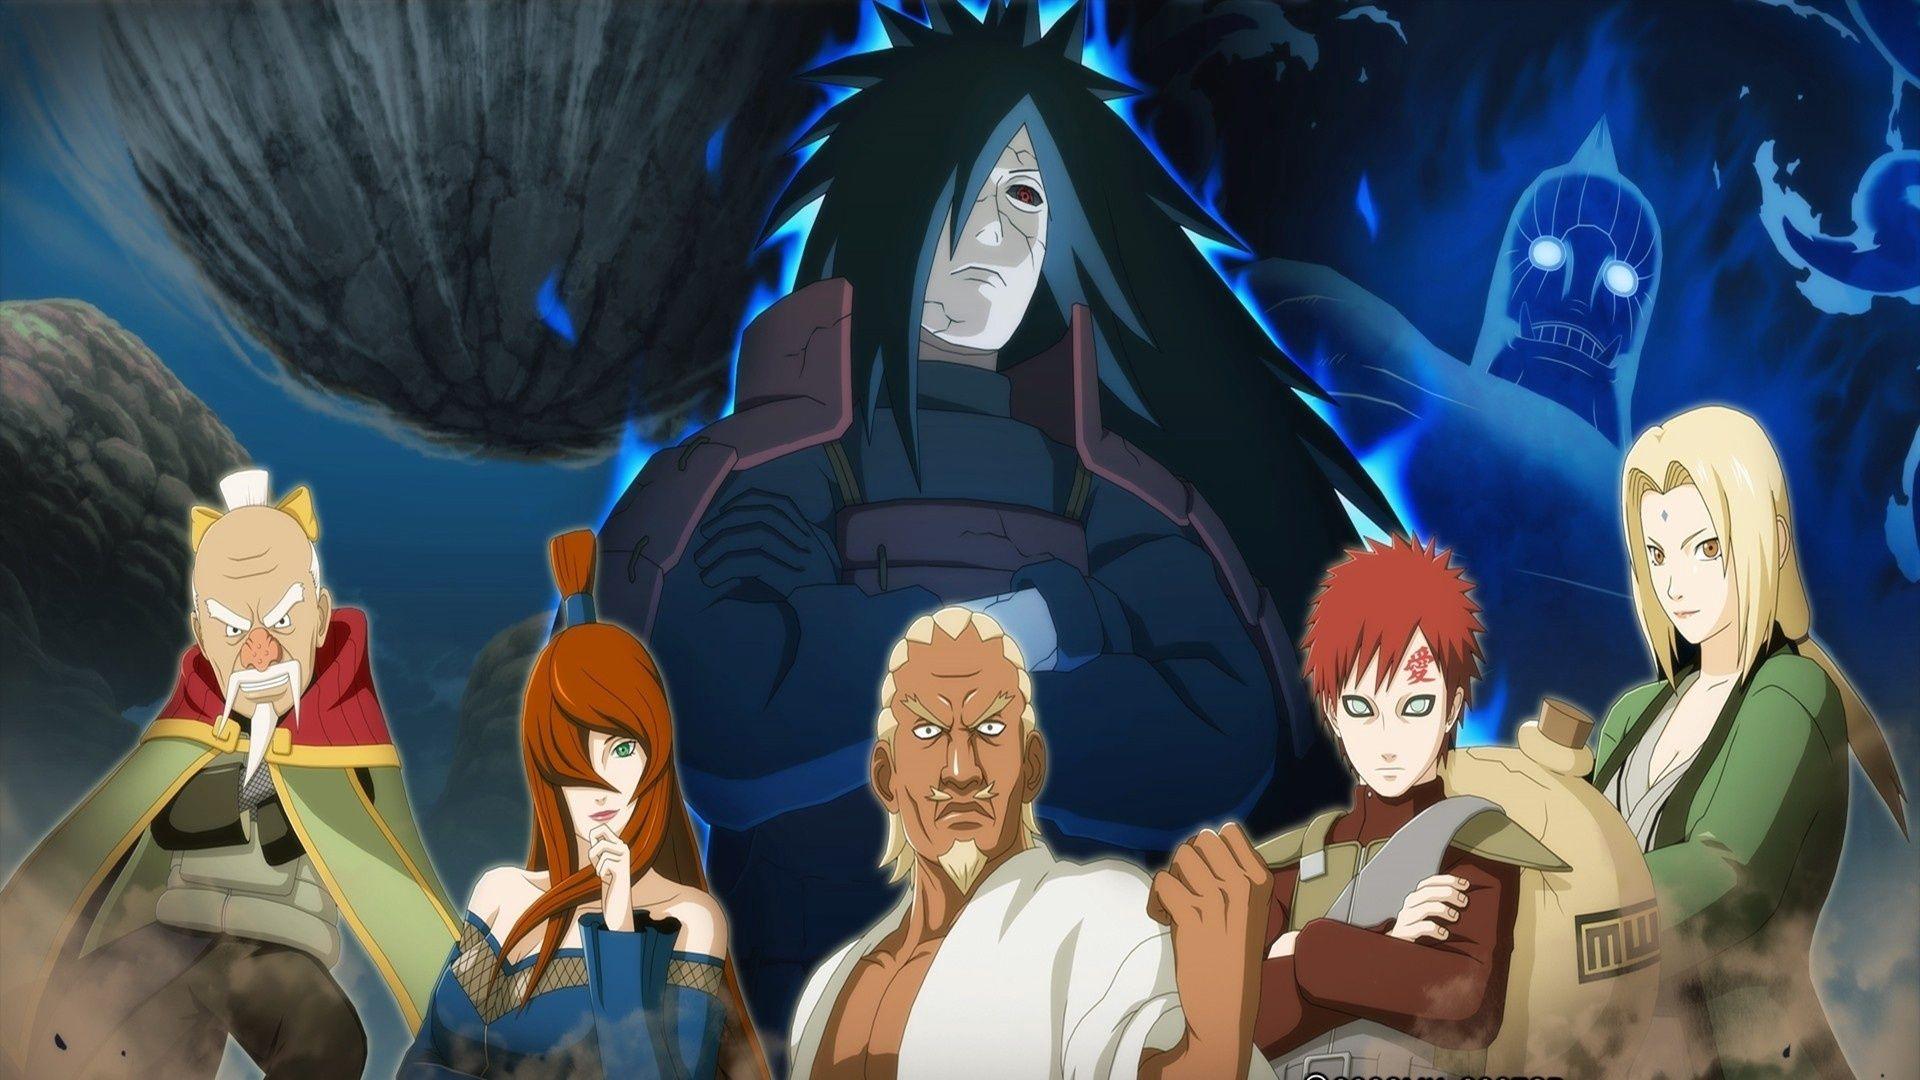 Madara Vs Kage Full HD Wallpapers and Backgrounds Image.